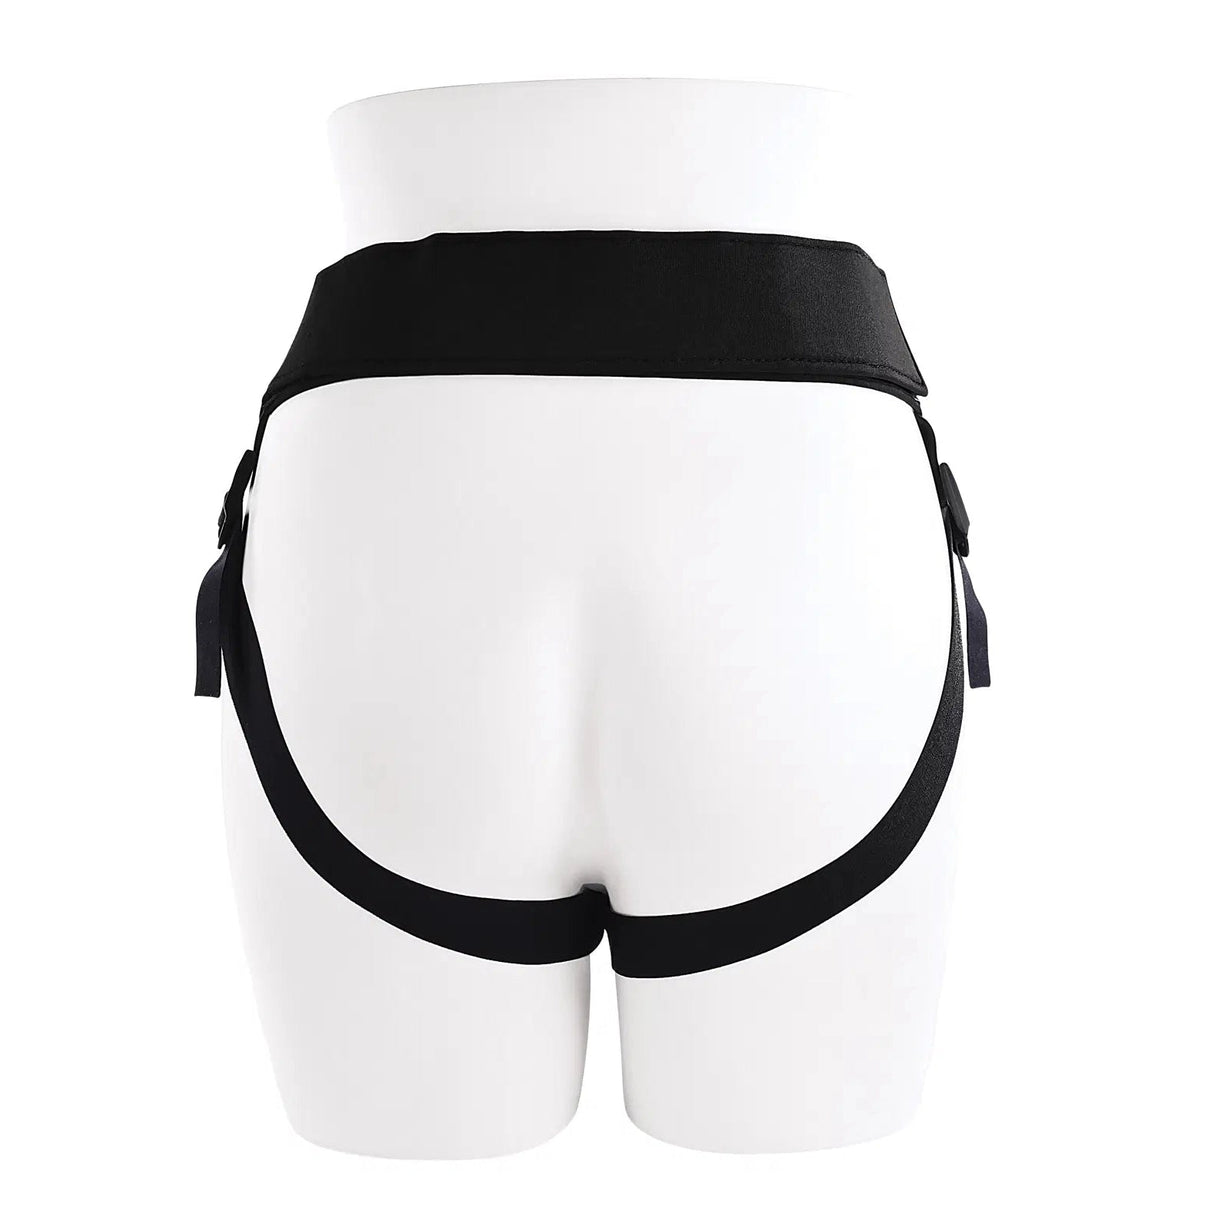 Gender X Sweet Embrace Strap On Vibe with Harness